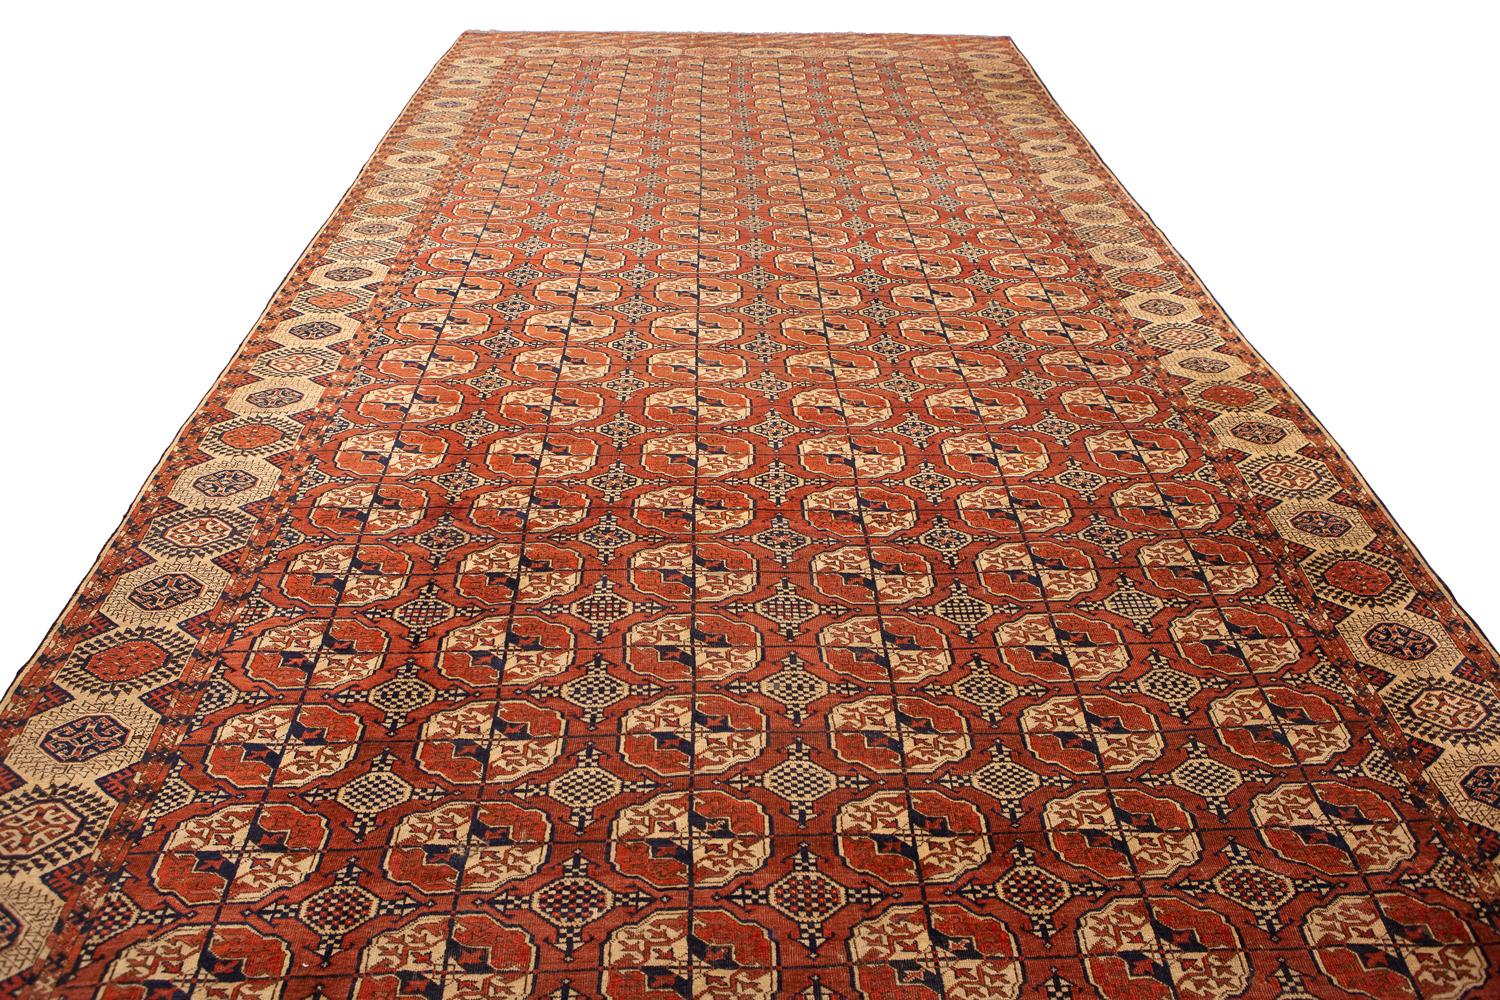 This is a one-of-a-kind antique bukhara rug with a geometric design and wool pile. The intricate details and rich colors make this rug a true work of art. Not only is it beautiful to look at, but it's also incredibly soft and comfortable to walk on.